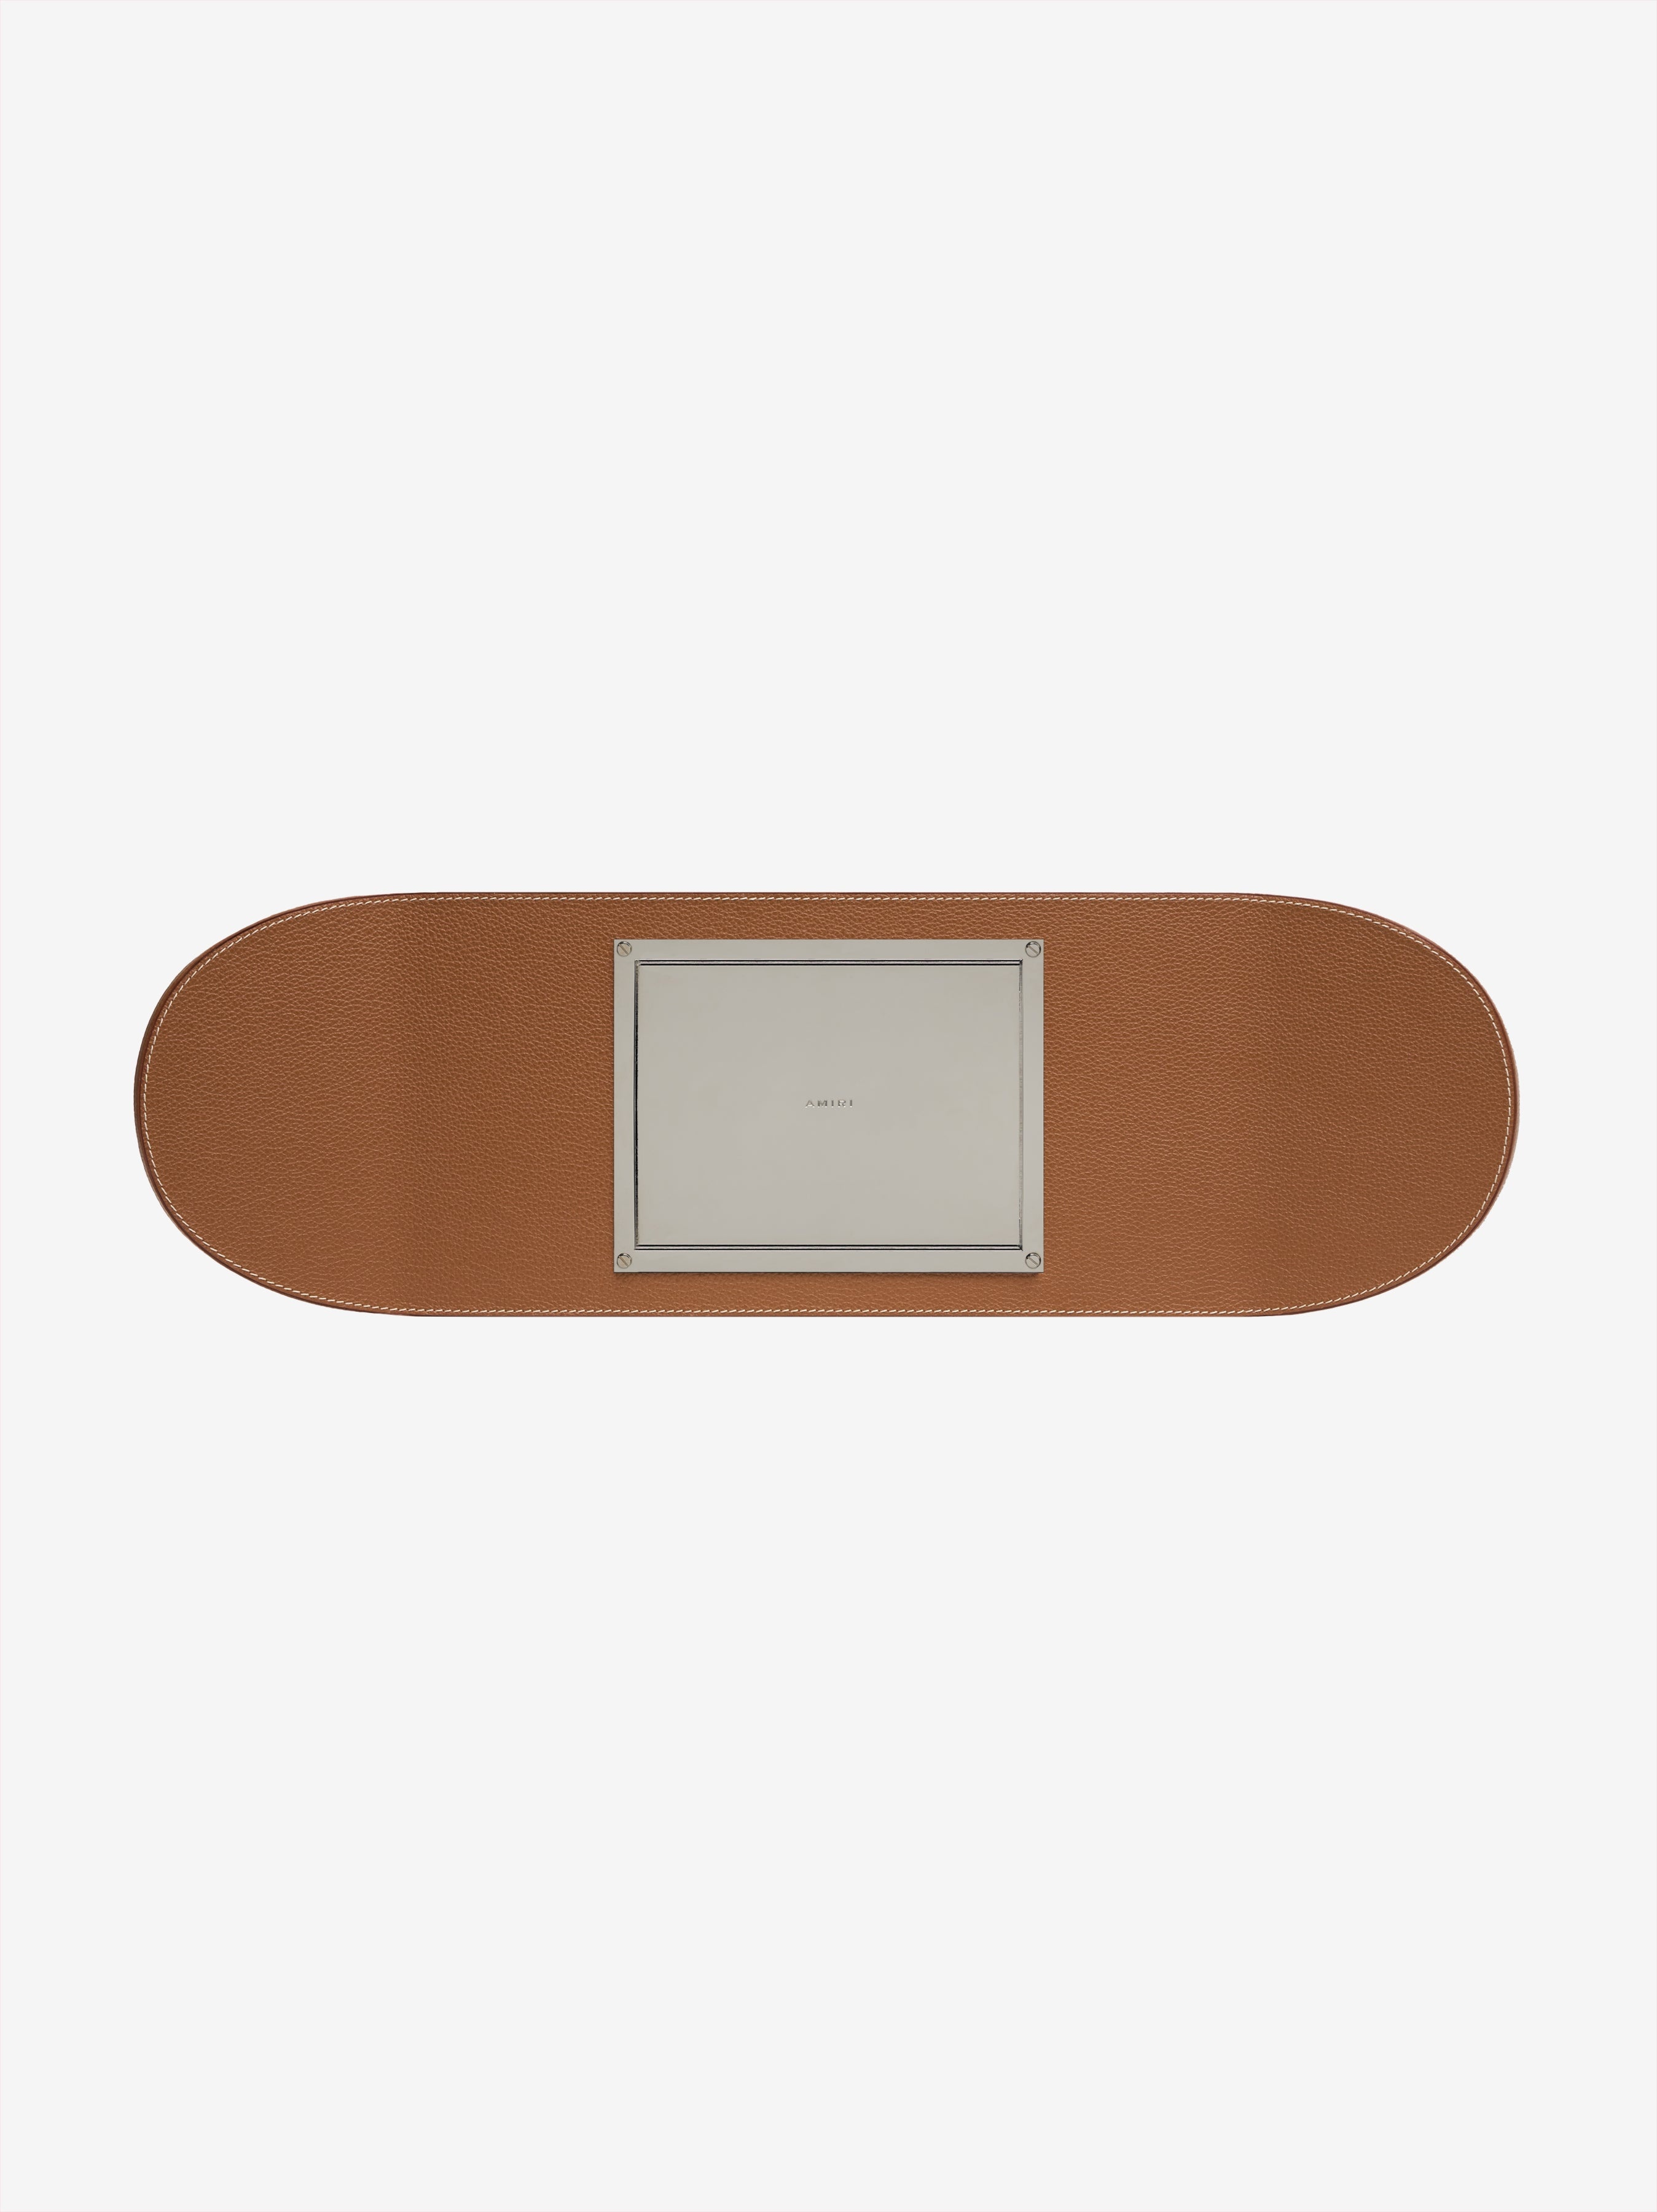 EXCLUSIVE LEATHER SKATE DECK CATCH TRAY - 1